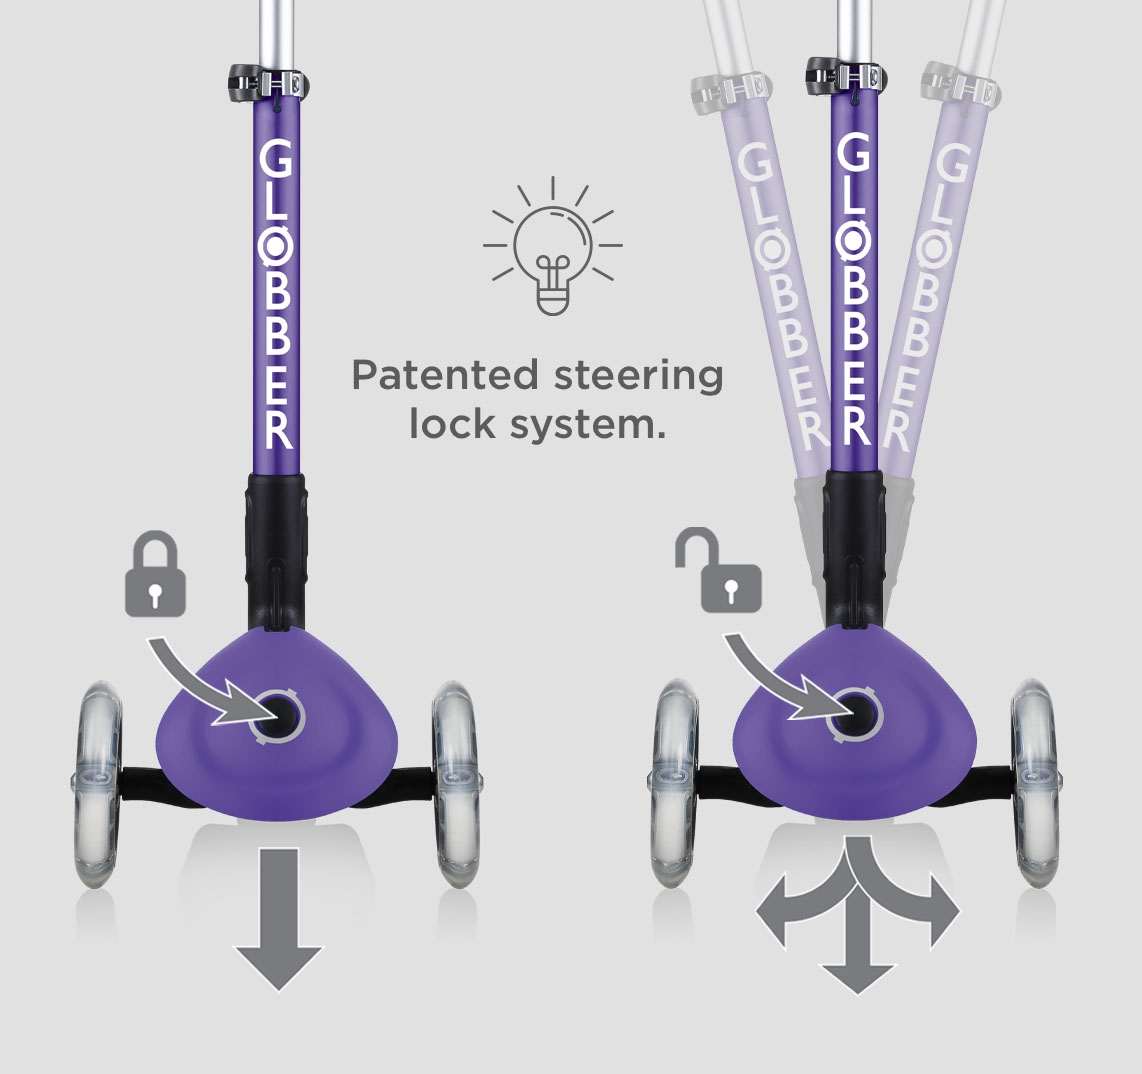 safe 3 wheel toddler scooters for 2 year olds with patented steering lock button - Globber JUNIOR